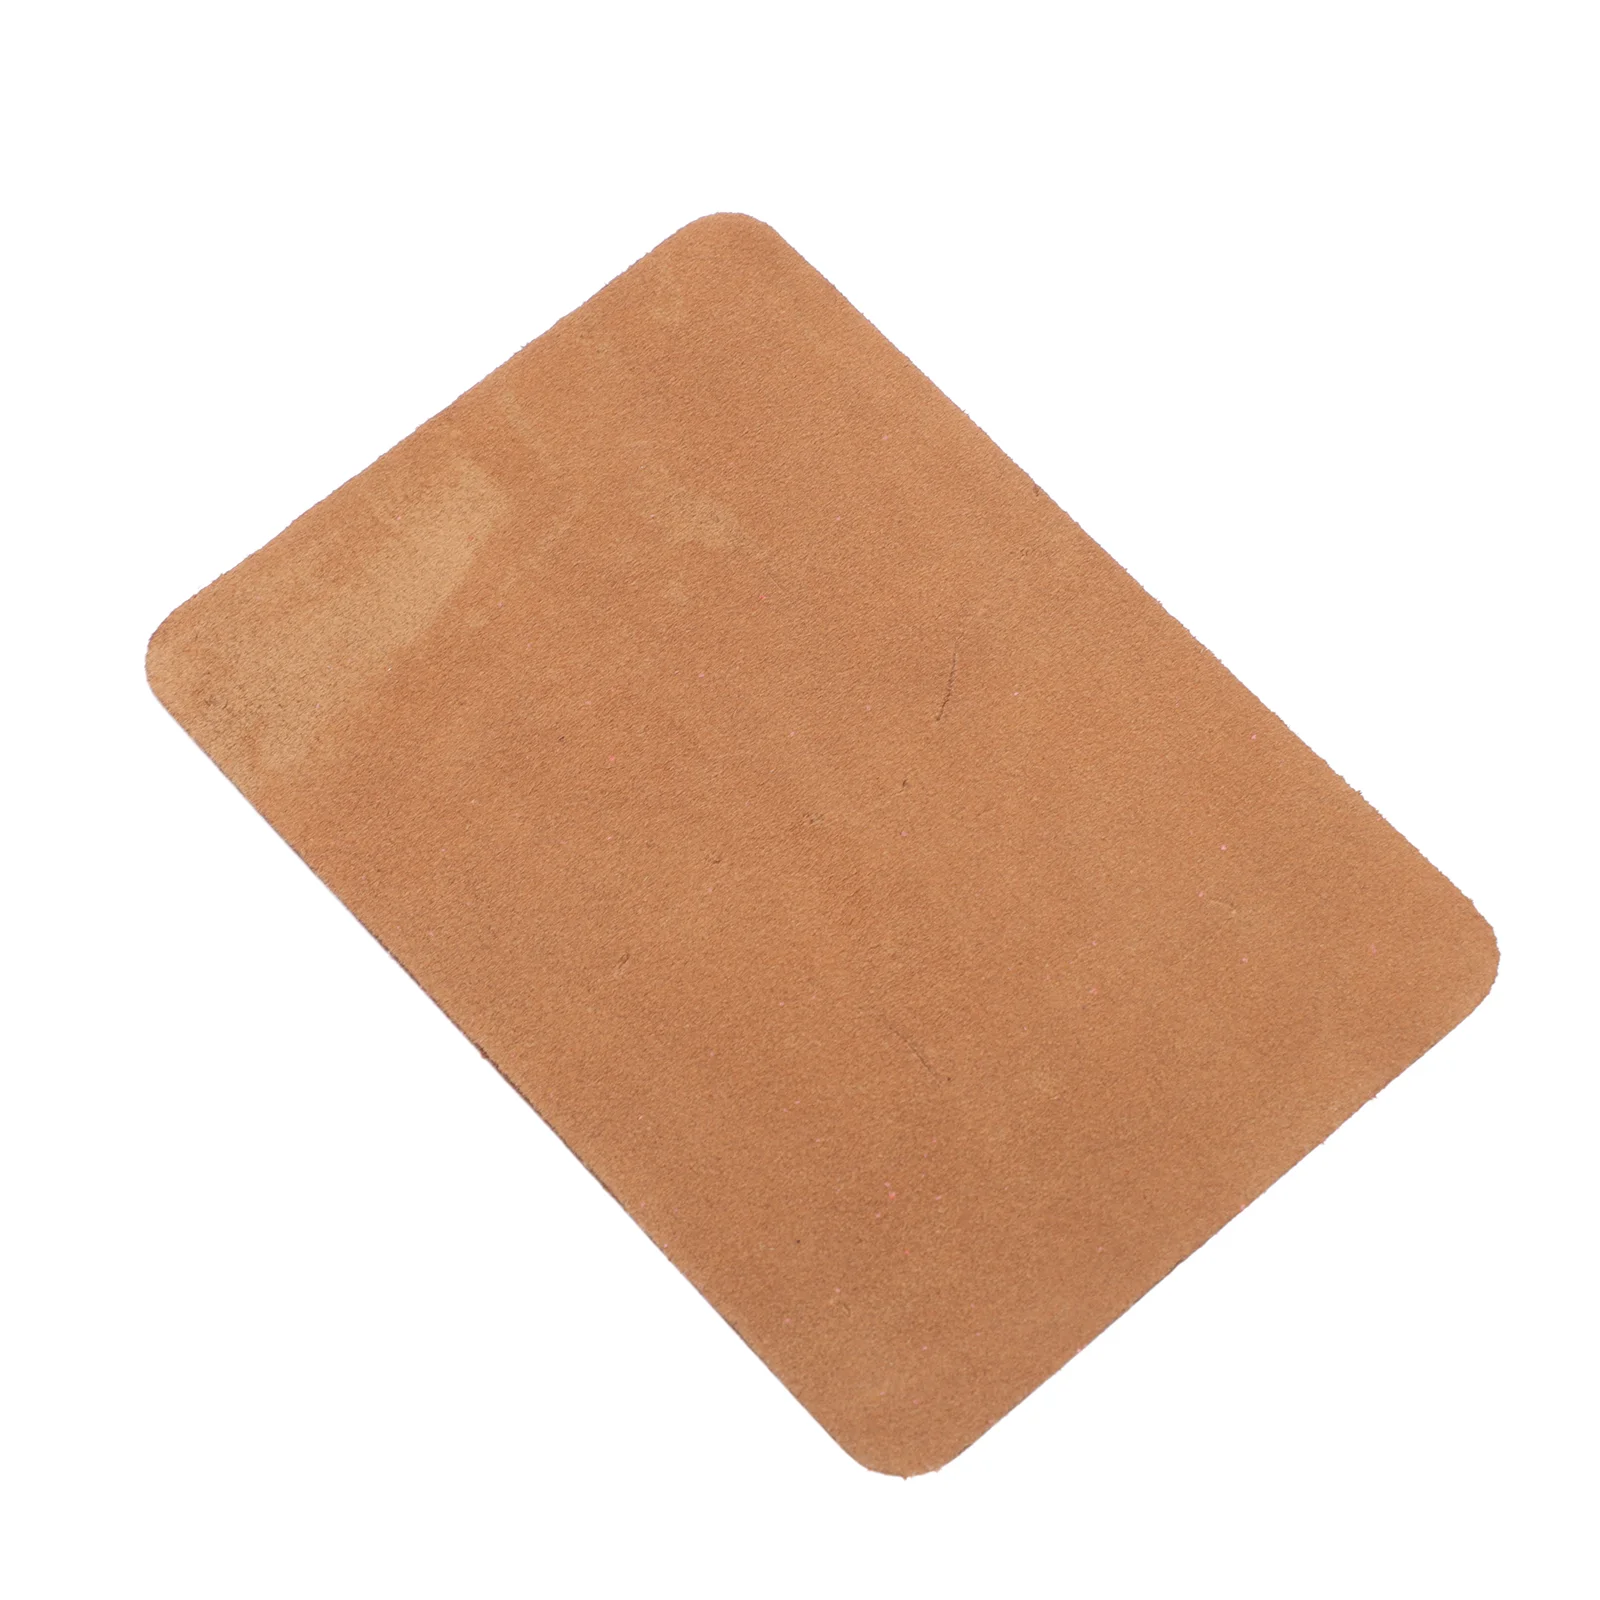 

Guitar Non-slip Mat Wear-resistant Musical Instrument Pad Erhu Anti-skid Cowhide for Instruments Accessories Fixed